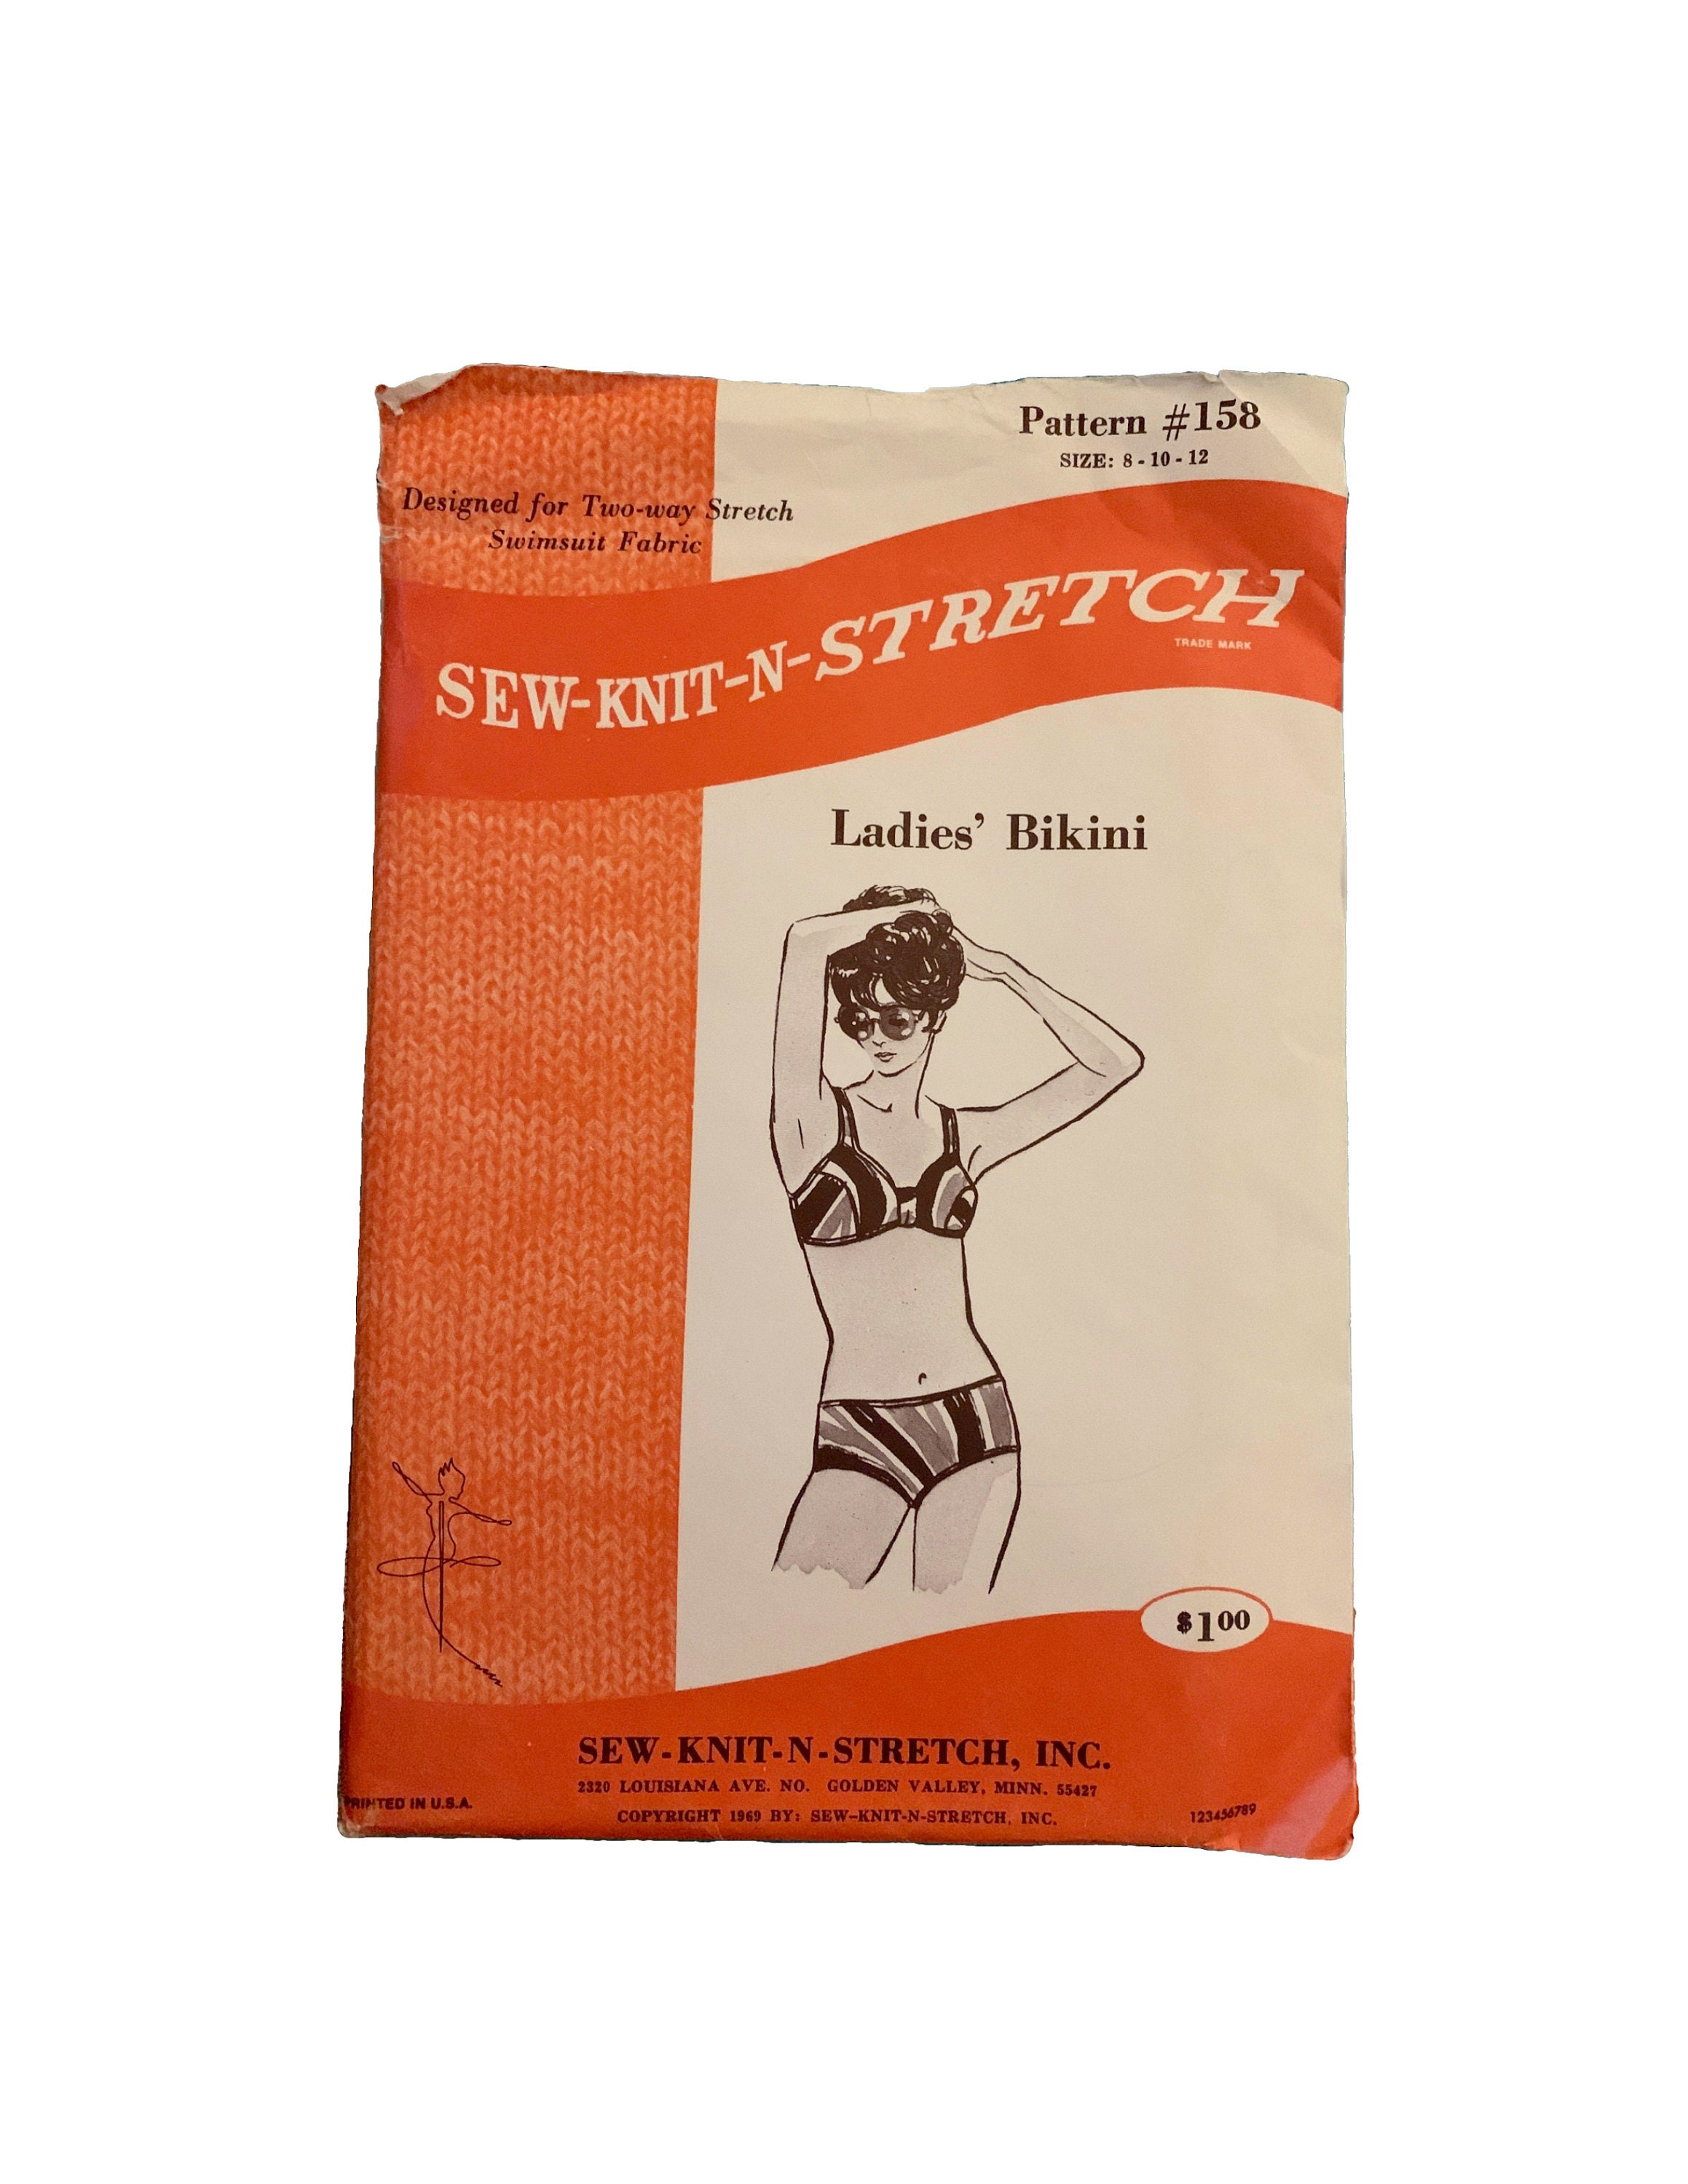 Swimsuit Pattern uncut 60s One Piece Swimsuit Retro Swimsuit vintage pattern MultiSize 8-12 Bust 31 12-34 Cosplay Sew Knit N Stretch 159